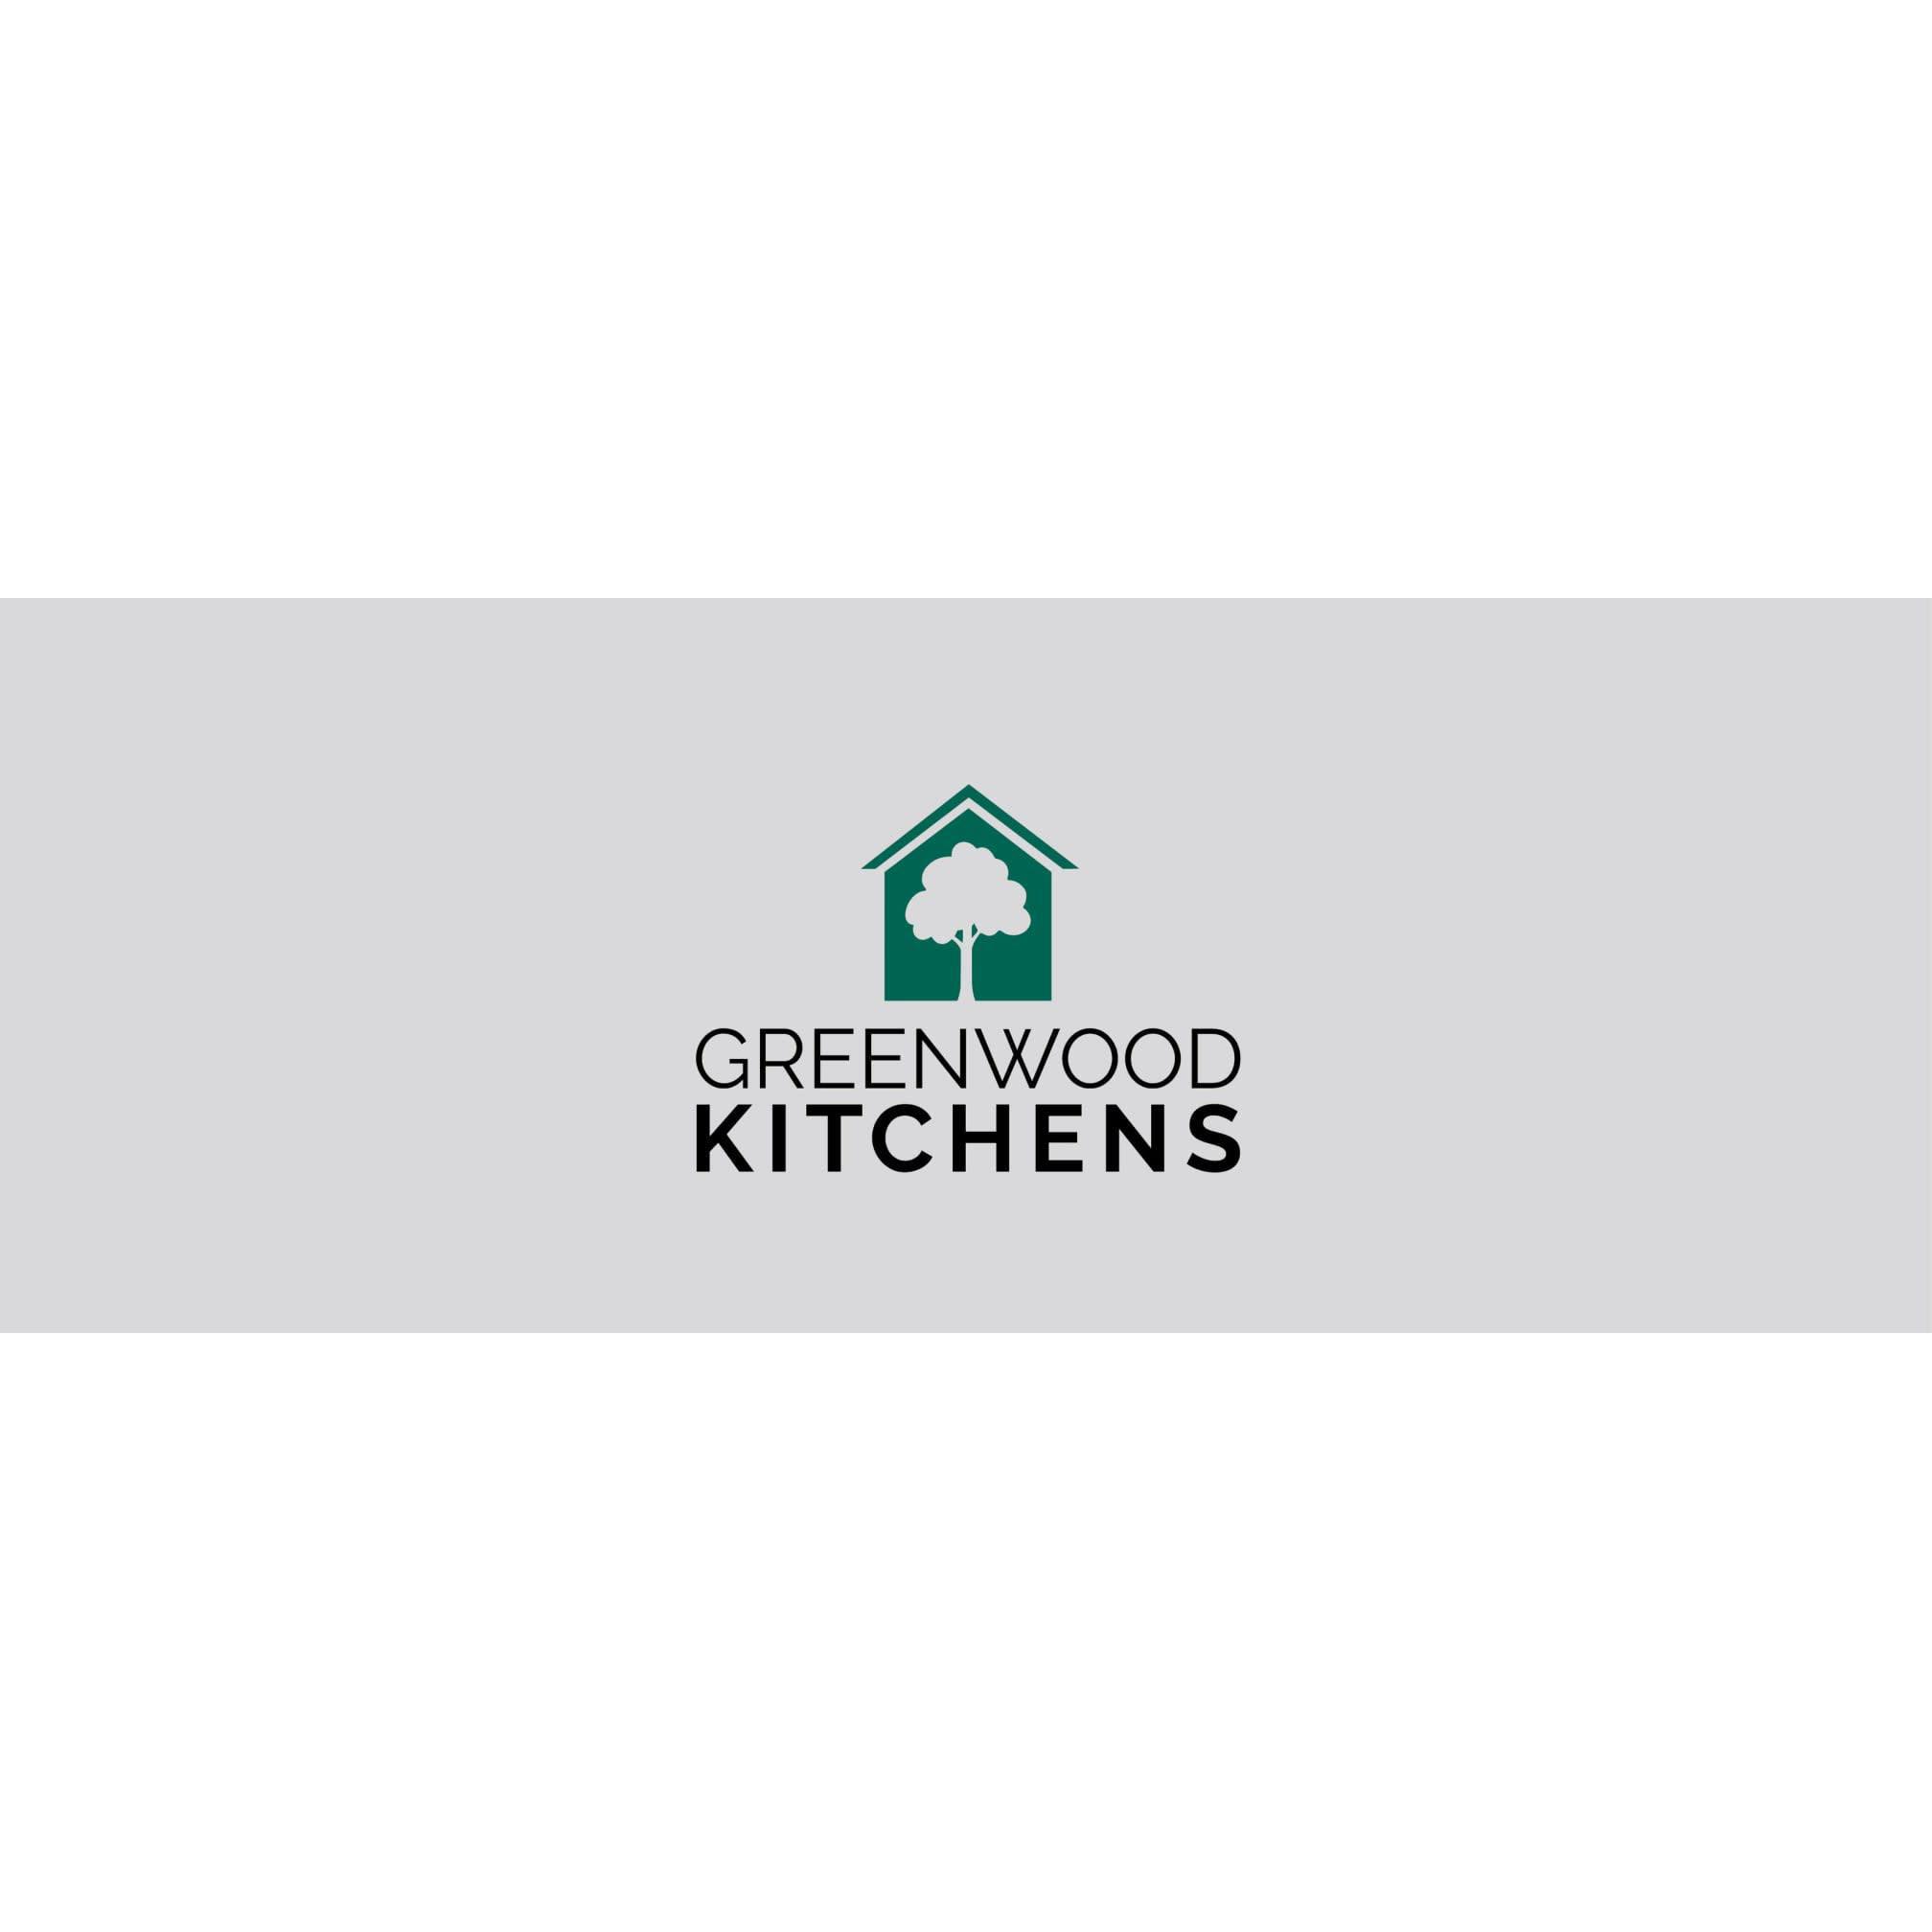 Greenwood Kitchens - Bicester, Oxfordshire OX26 2GS - 07498 297778 | ShowMeLocal.com